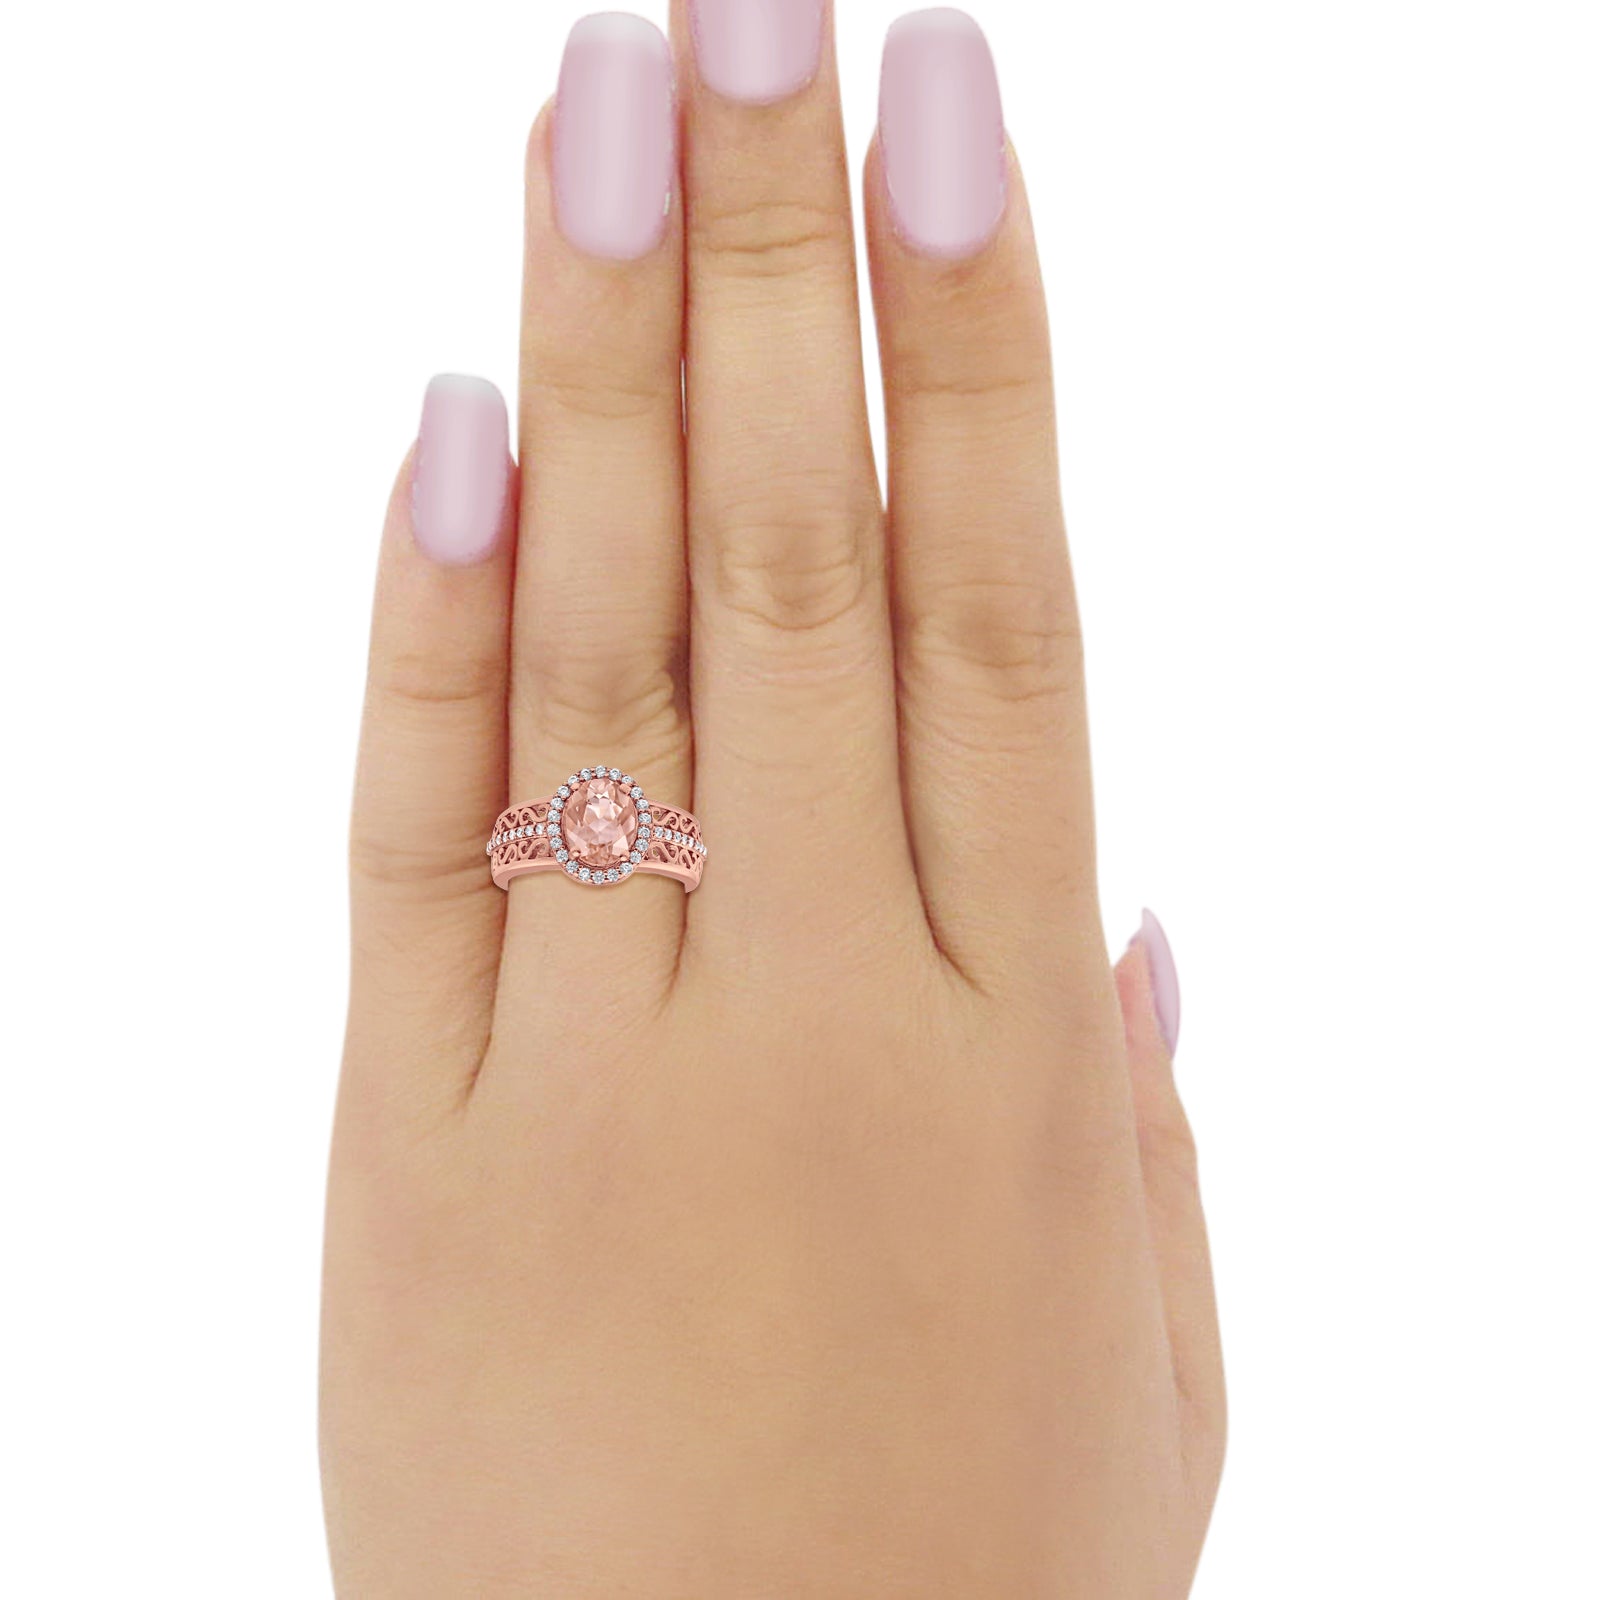 Irish Claddagh Heart Promise Ring Rose Tone, Simulated Morganite CZ 925 Sterling Silver